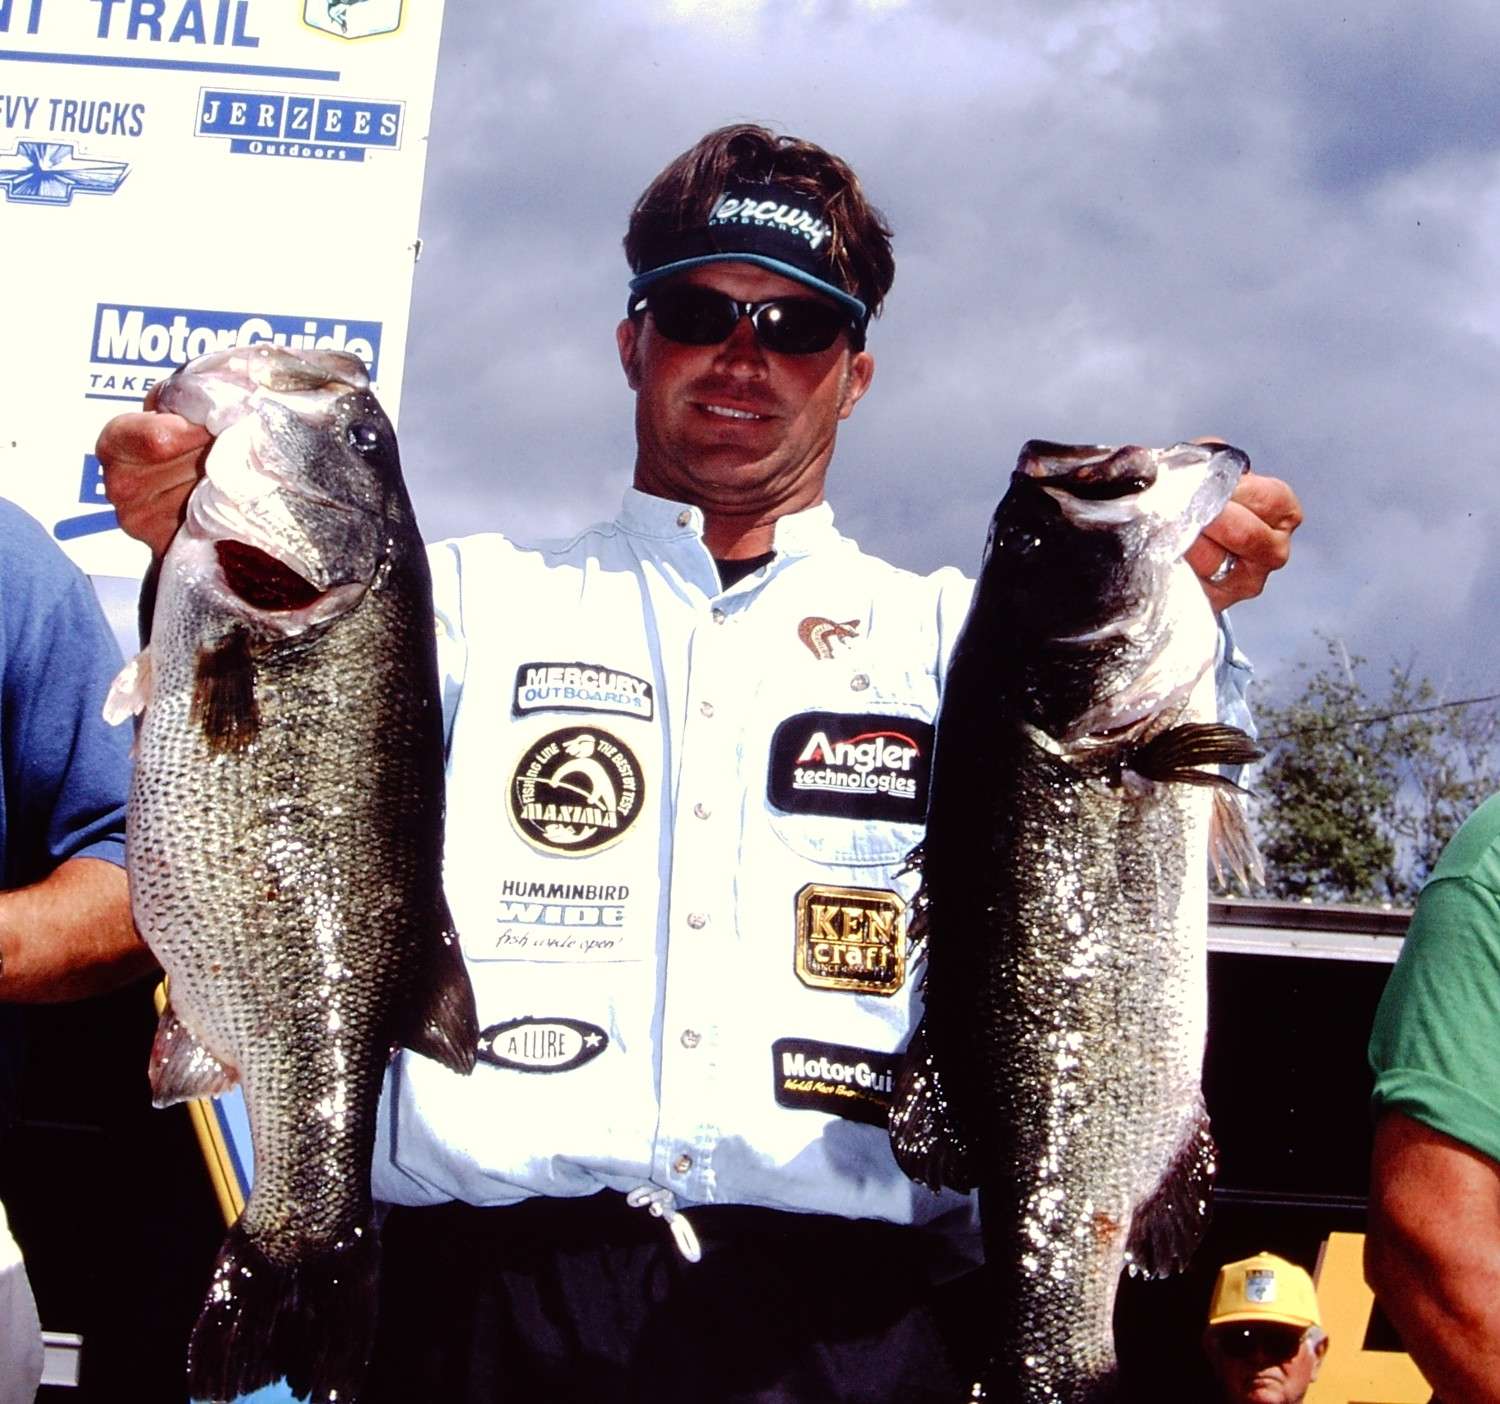 Heaviest Winning Weight (three-day tournament): Byron Velvick, 83-5
Byron Velvick had been competing with B.A.S.S. for 10 years, but he had not had great success, and any success the California pro did have was on Western waters. He showed the world what he was capable of on April 15, 2000, when the Western Invitational came to California's Clear Lake. The pro won the event with 83 pounds, 5 ounces â more than 10 pounds more than fellow Californian and runner-up Skeet Reese had â and broke a record that has stood now for 14 years.